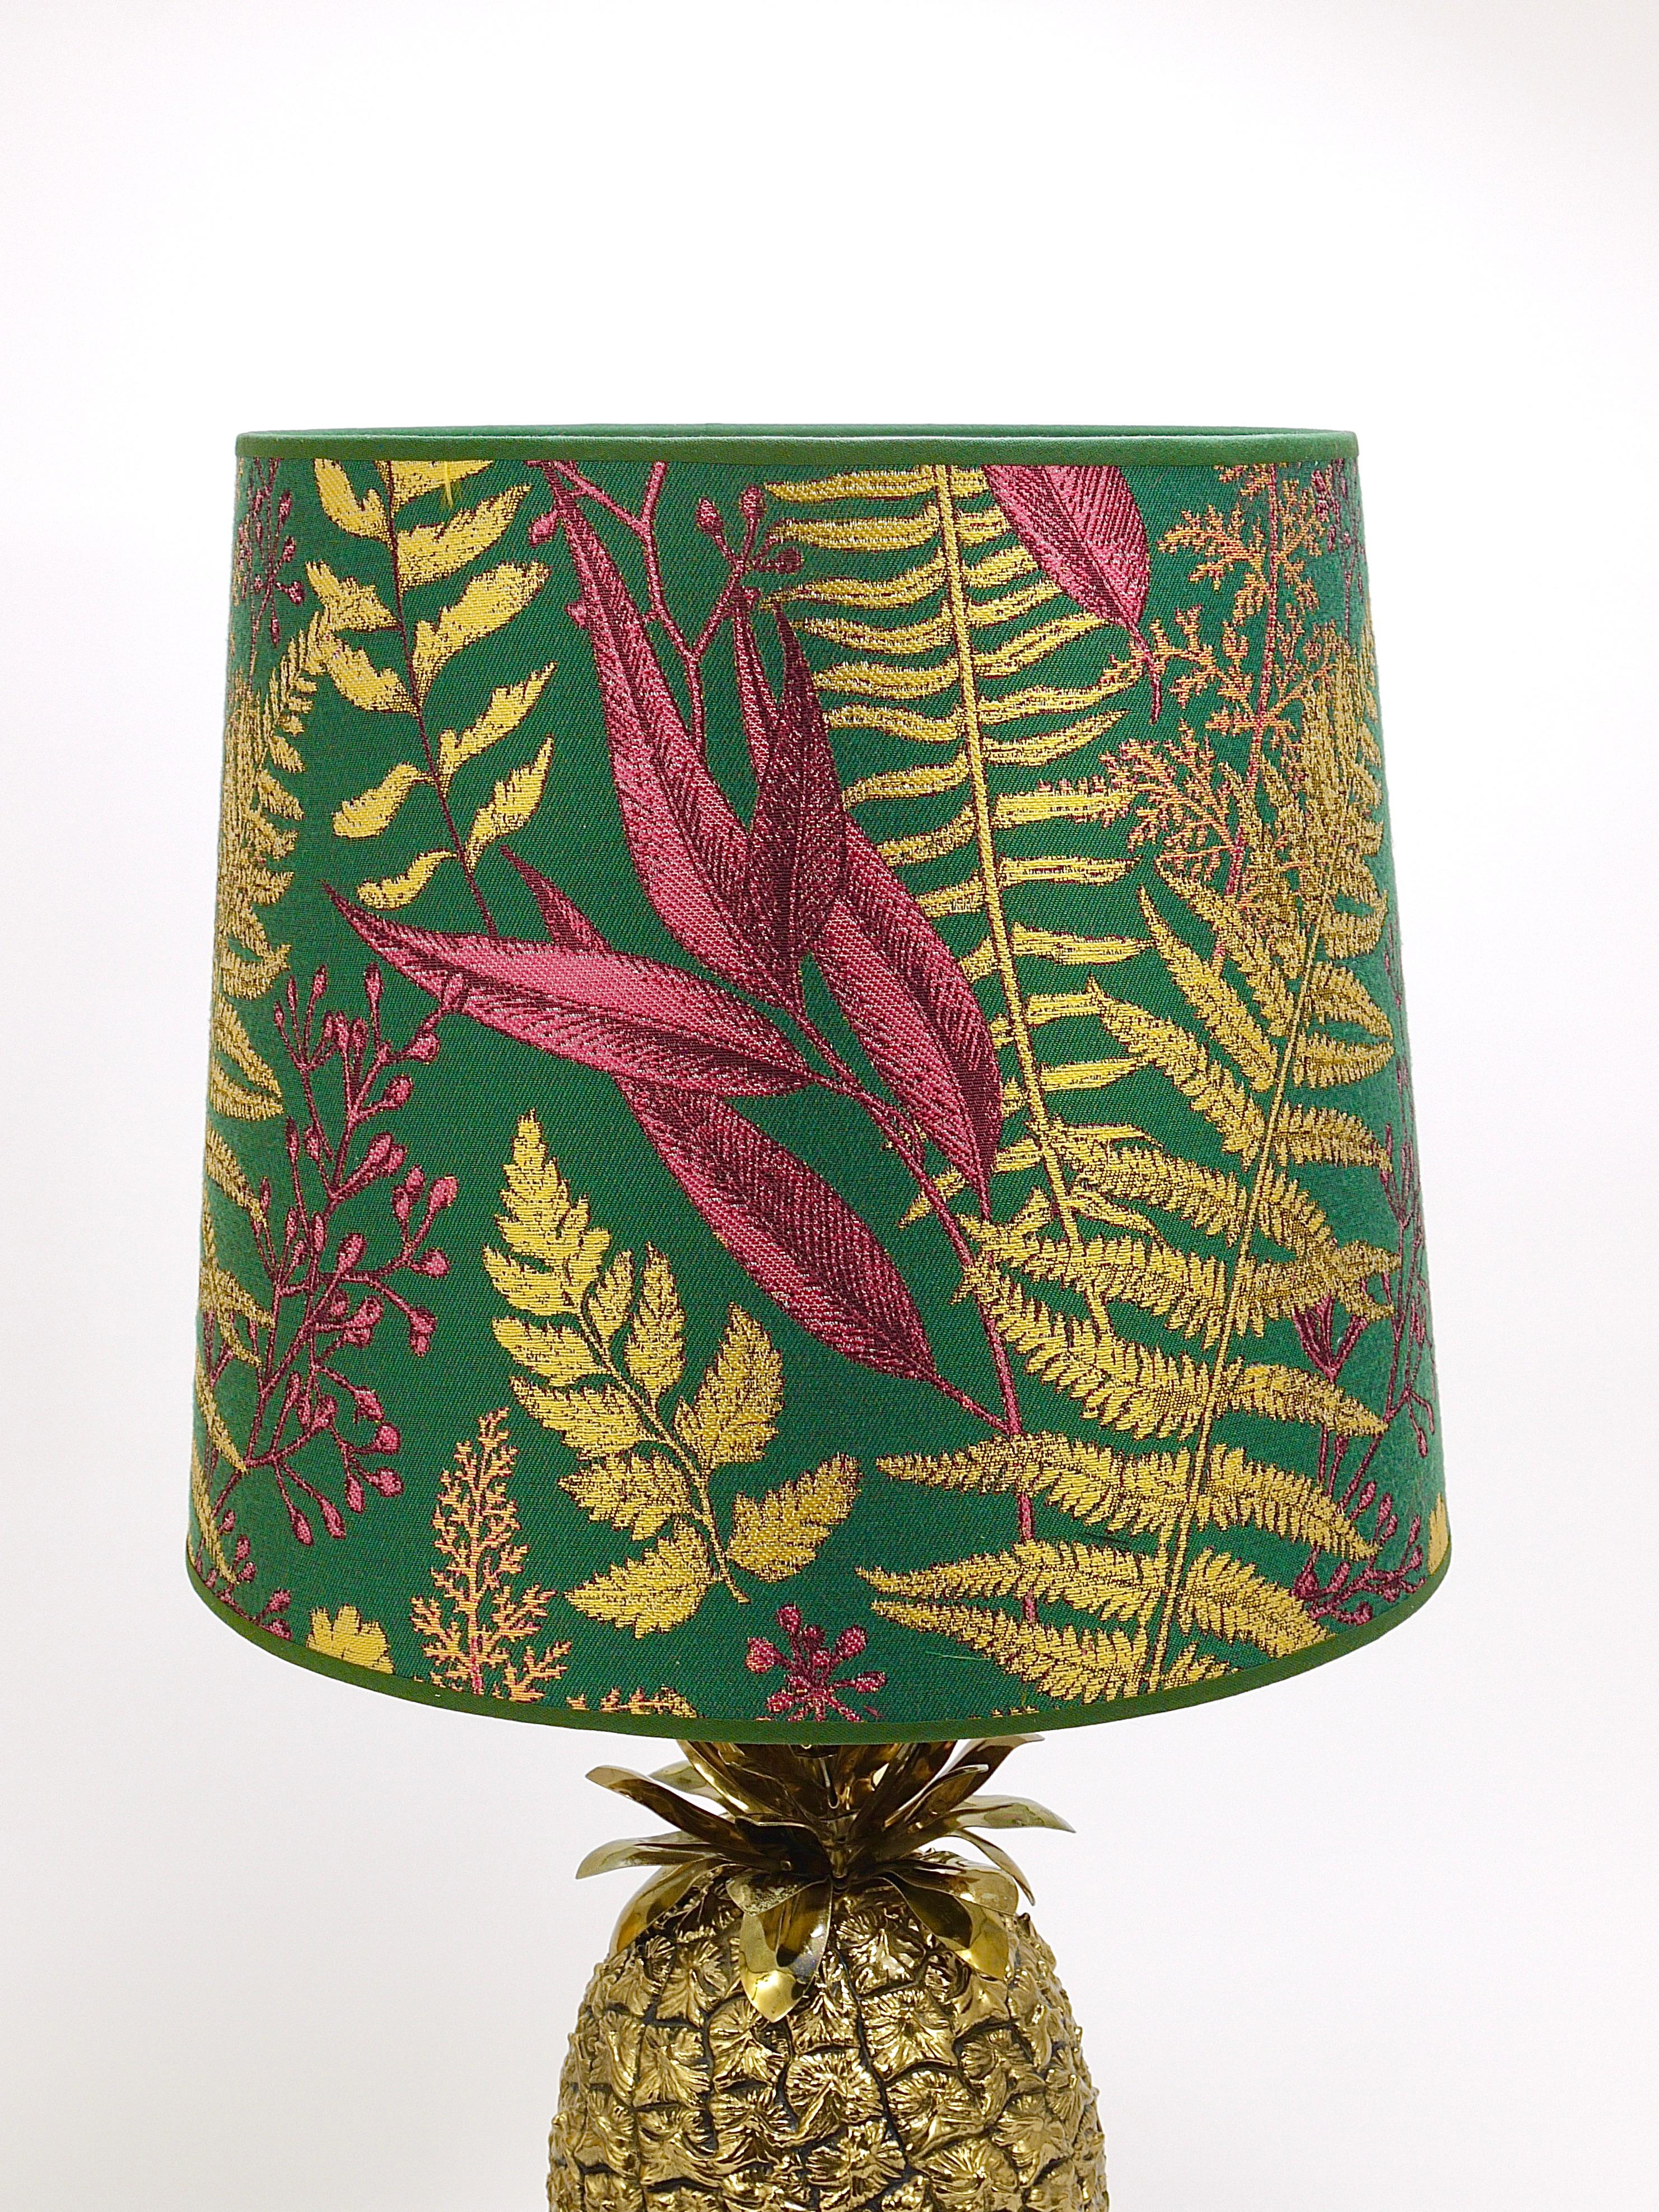 Mauro Manetti Hollywood Regency Pineapple Brass Table Lamp, Italy, 1970s For Sale 6